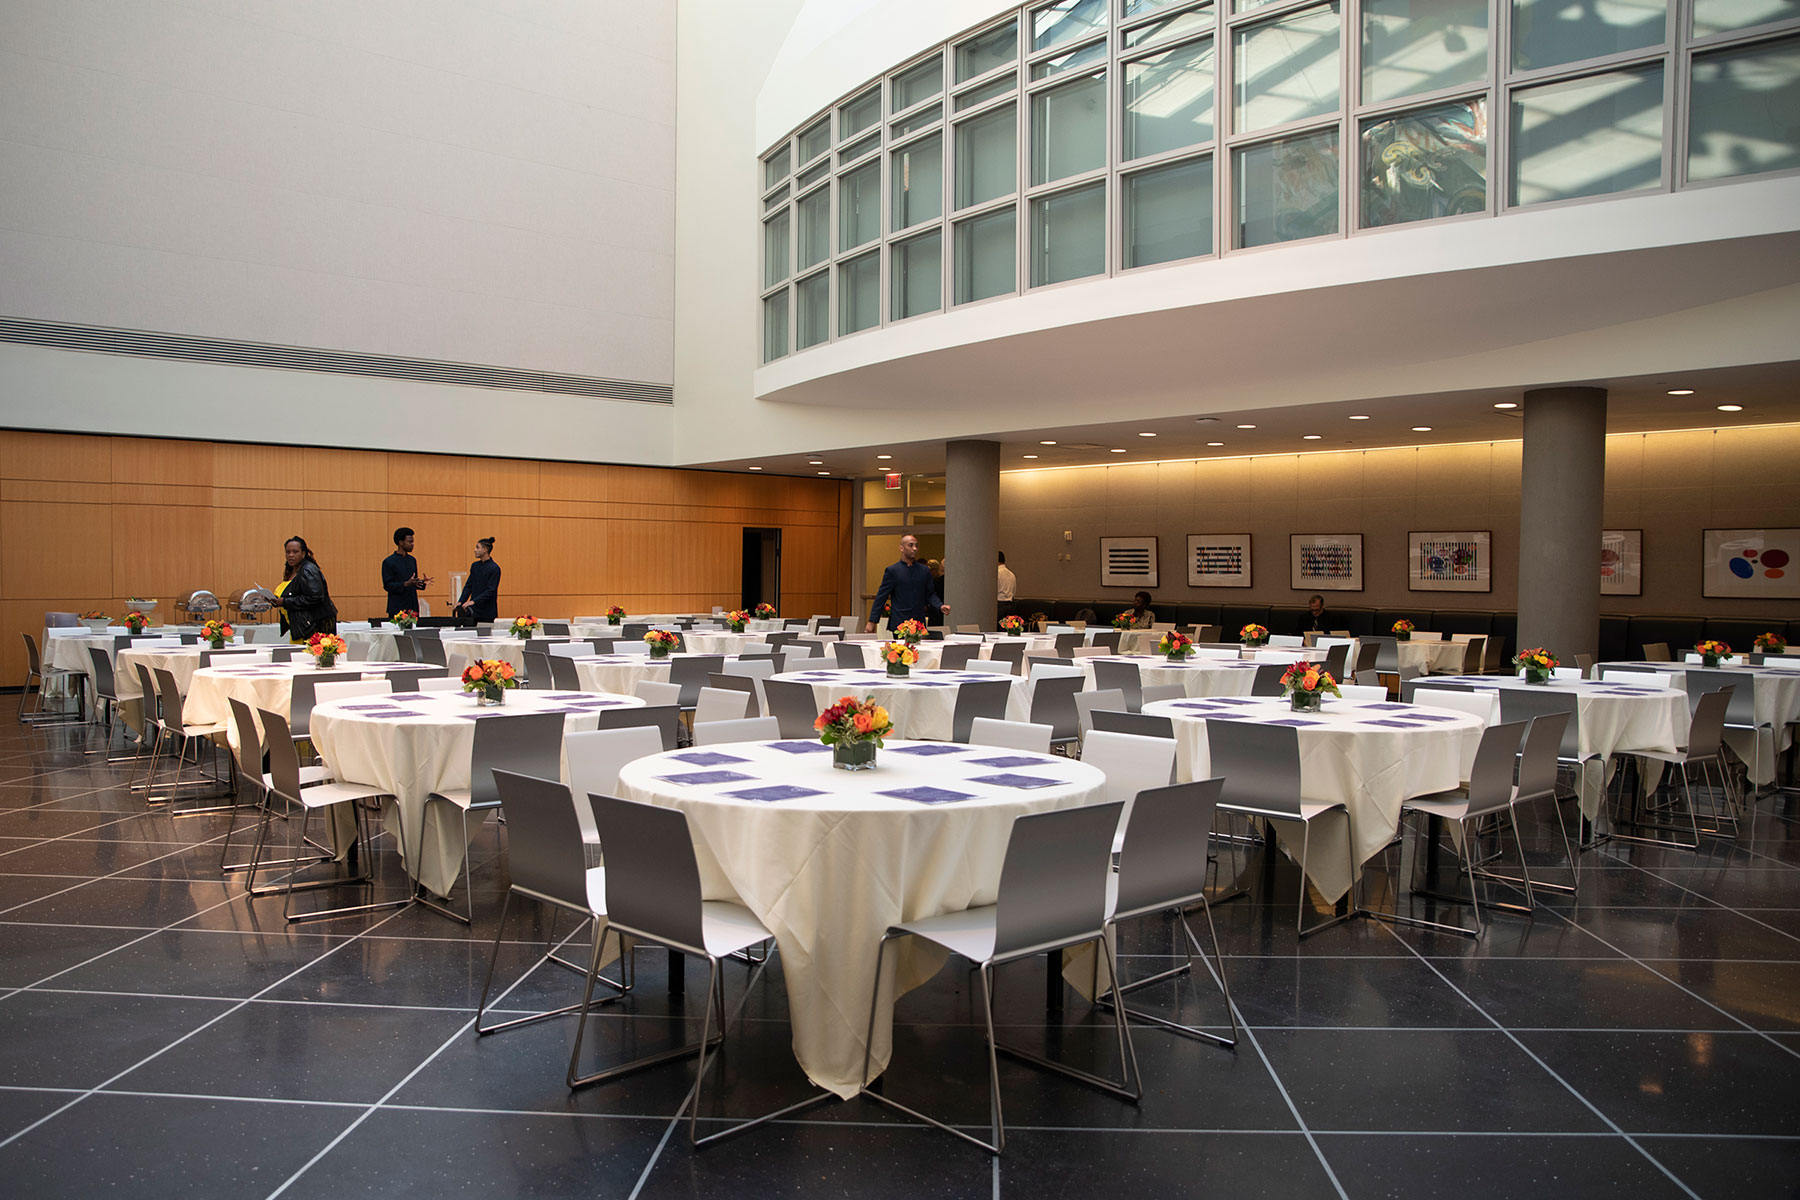 Dining Commons - Reception Space in NYC. Ideal for corporate receptions or private events.